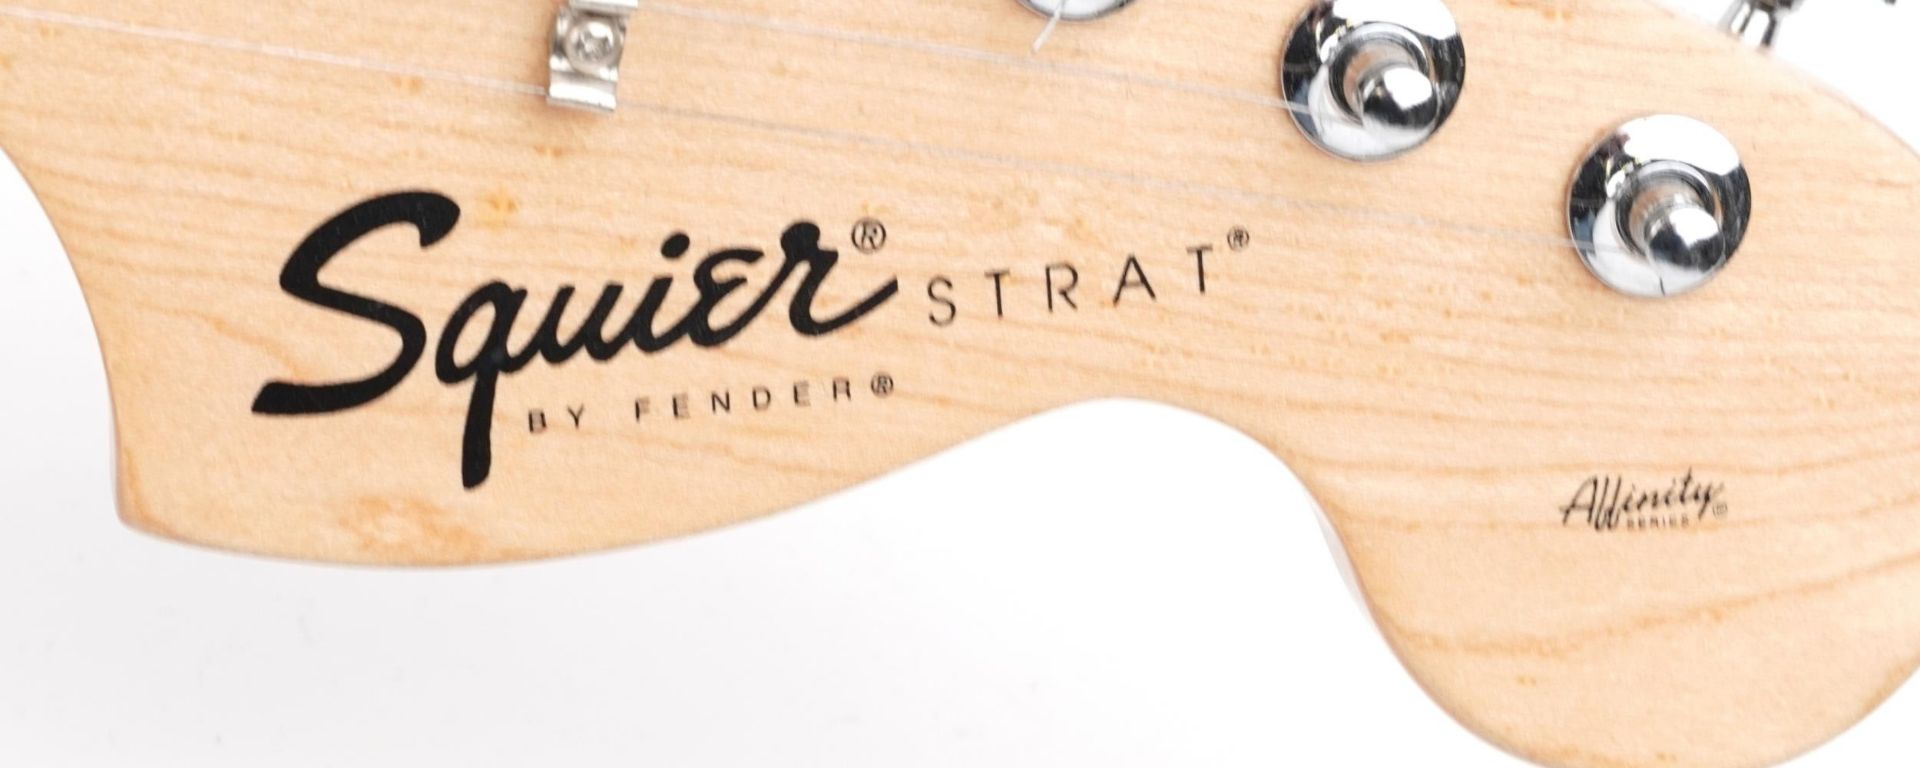 Squire Strat by Fender six string electric guitar with Fender Front Man amp and protective travel - Image 2 of 6